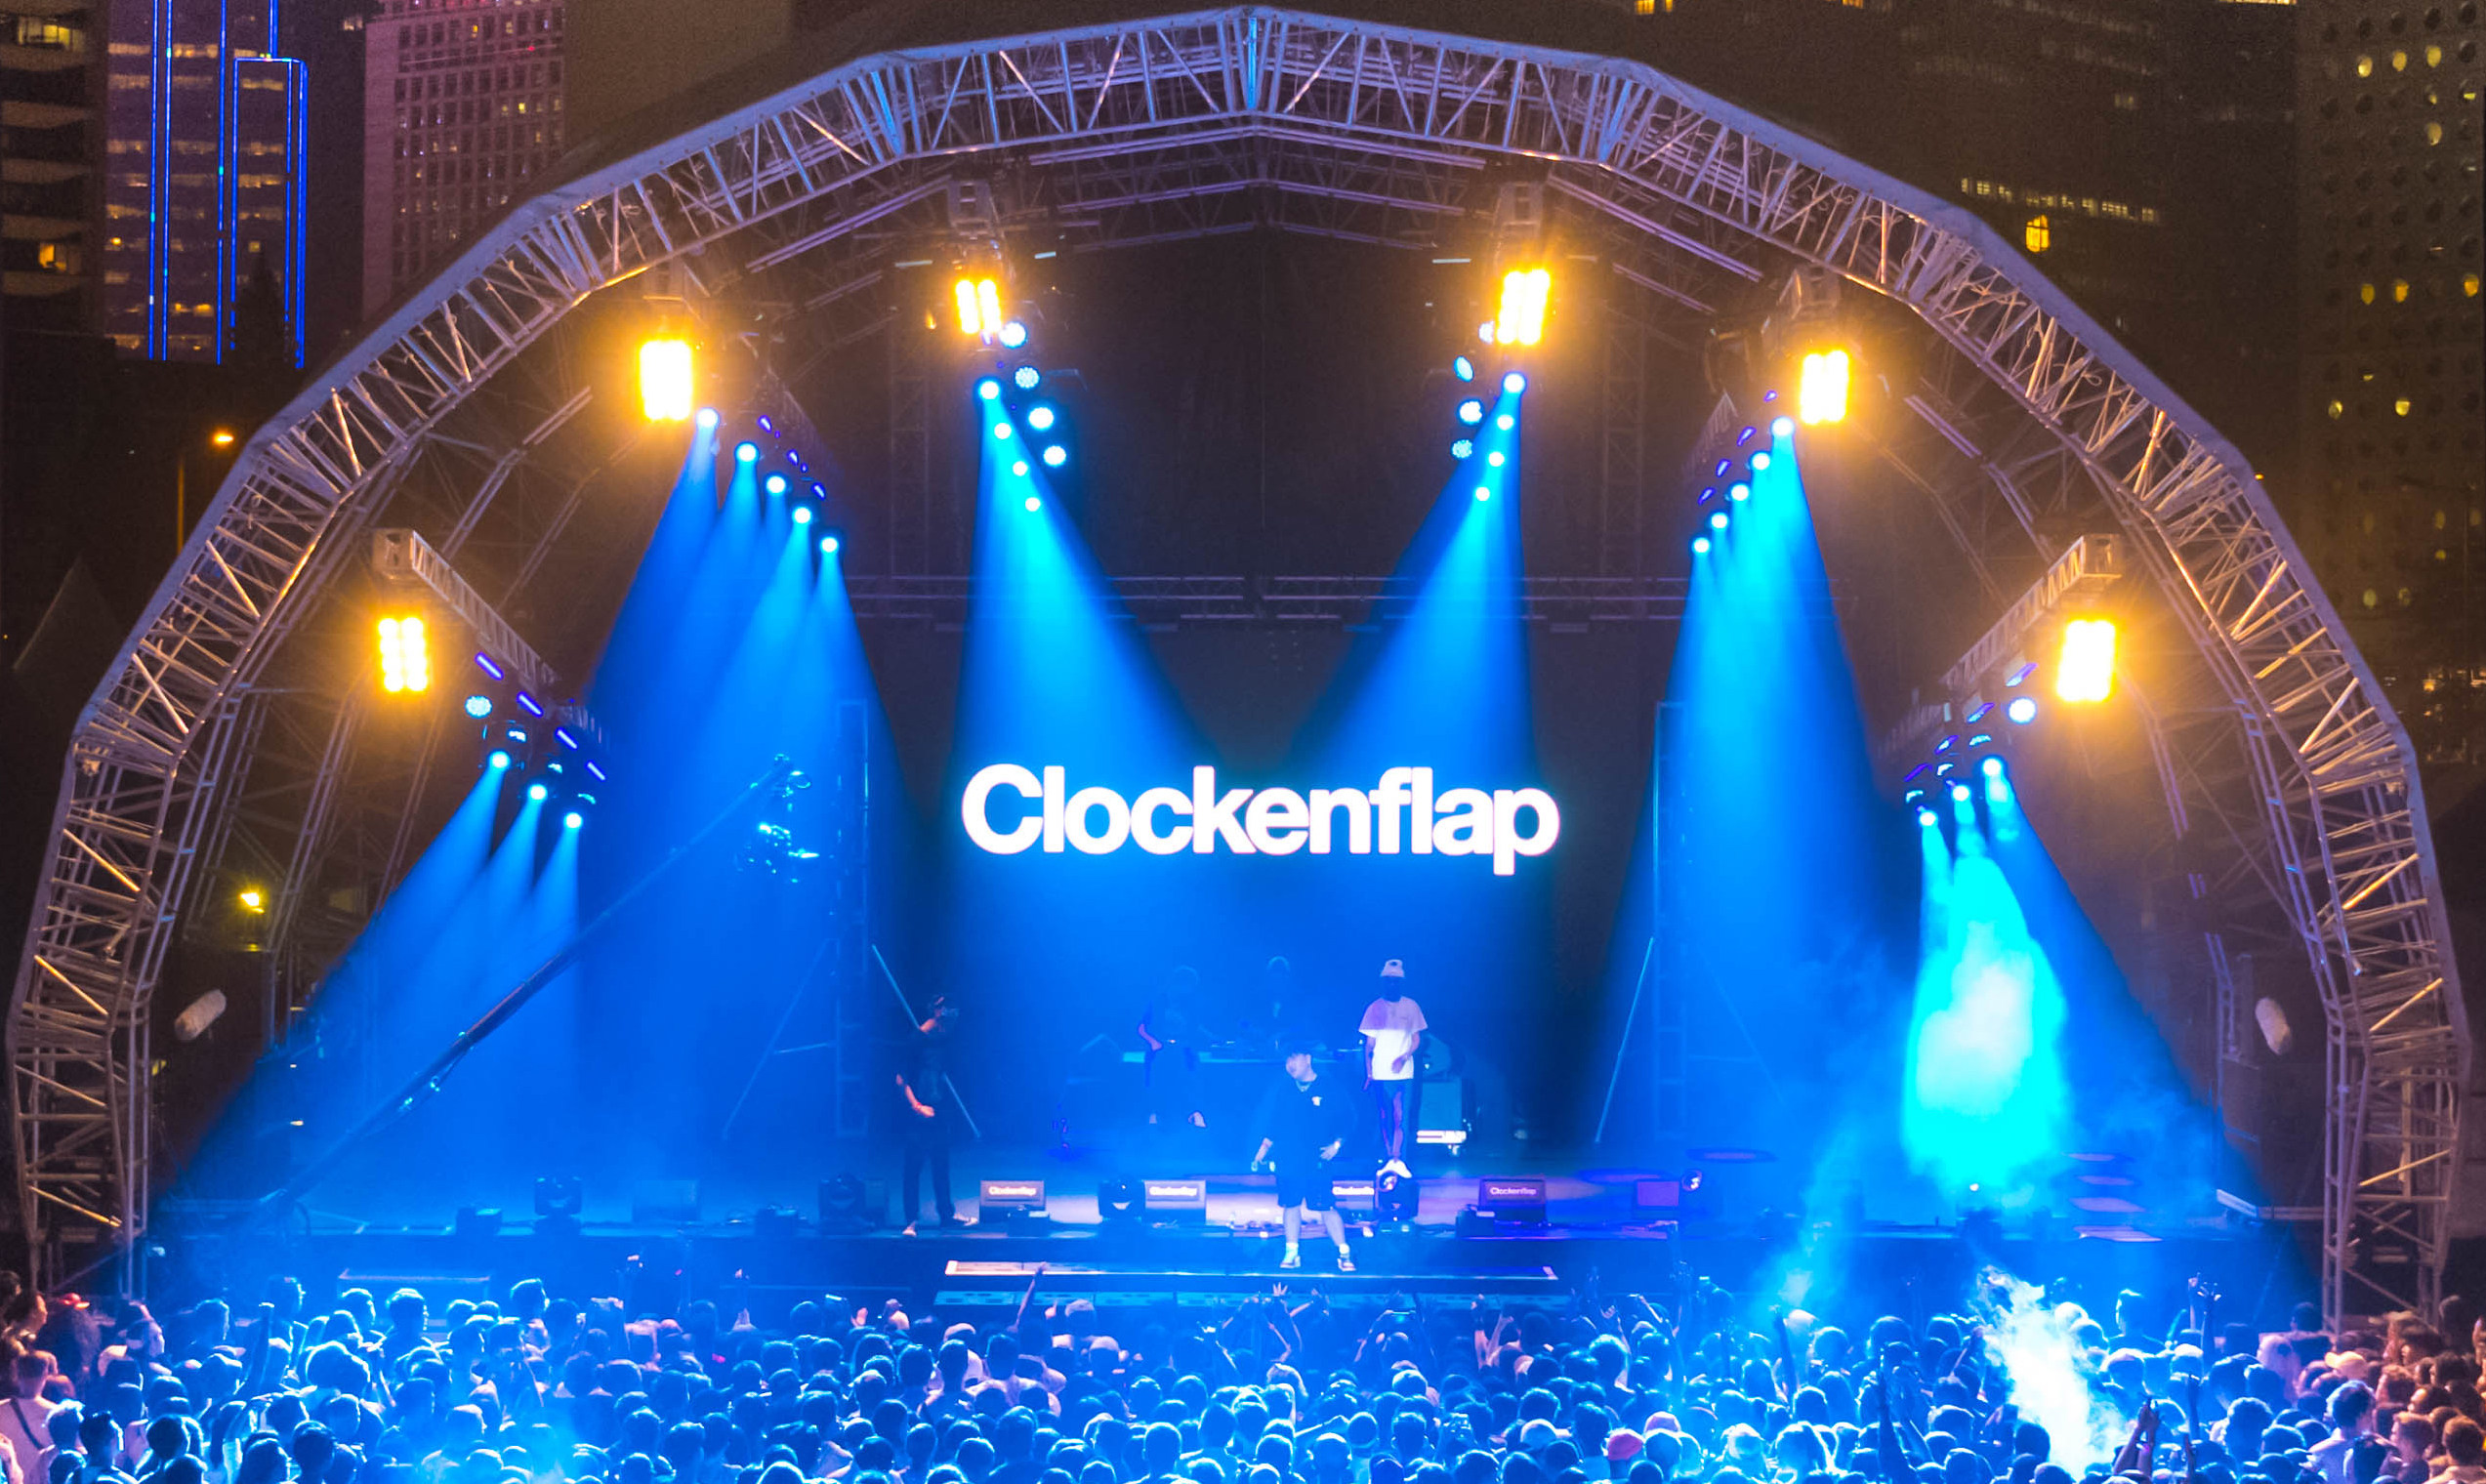 The Clockenflap event in 2018. Photo: Handout